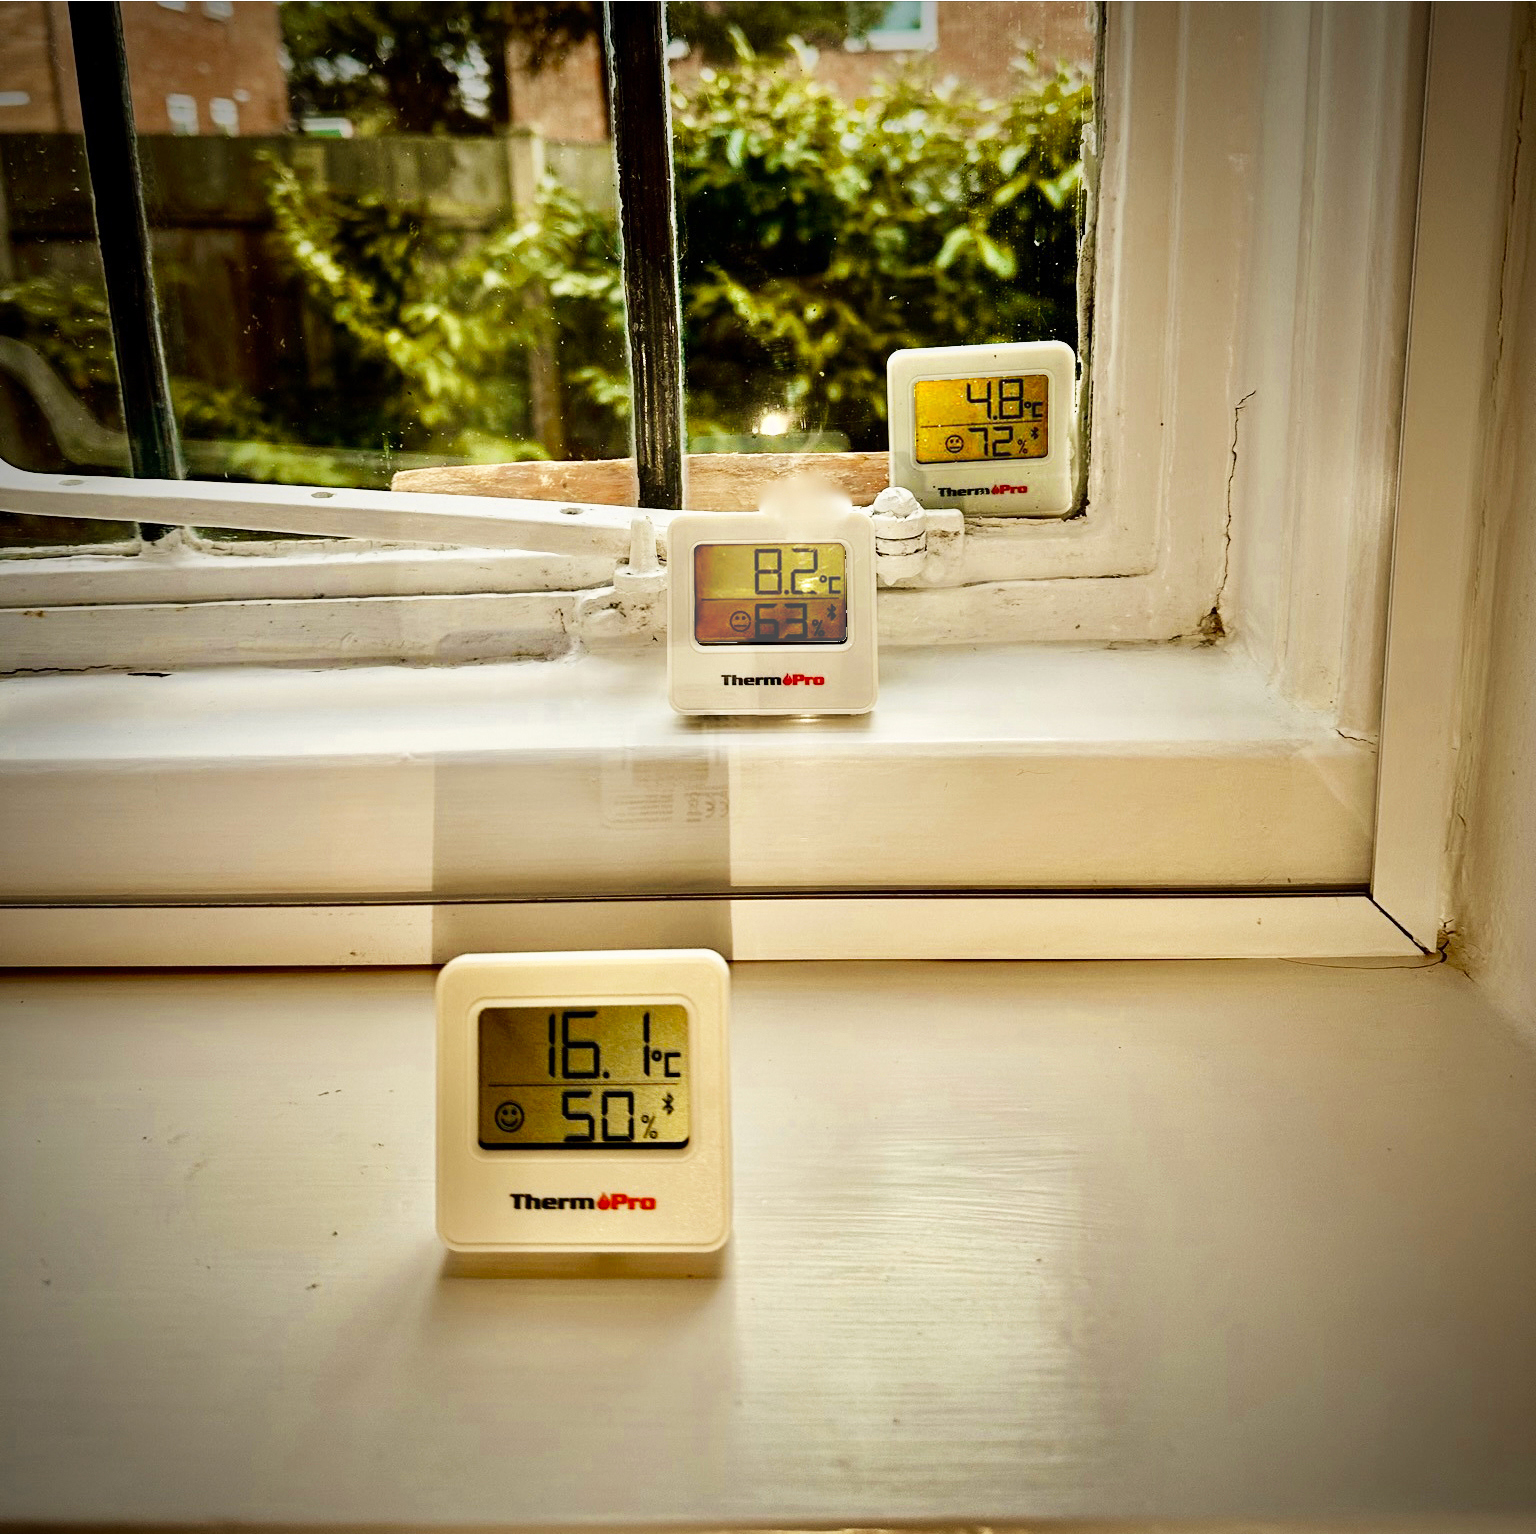 Secondary Glazing lets you turn the heating on less at lower temperatures in greater comfort